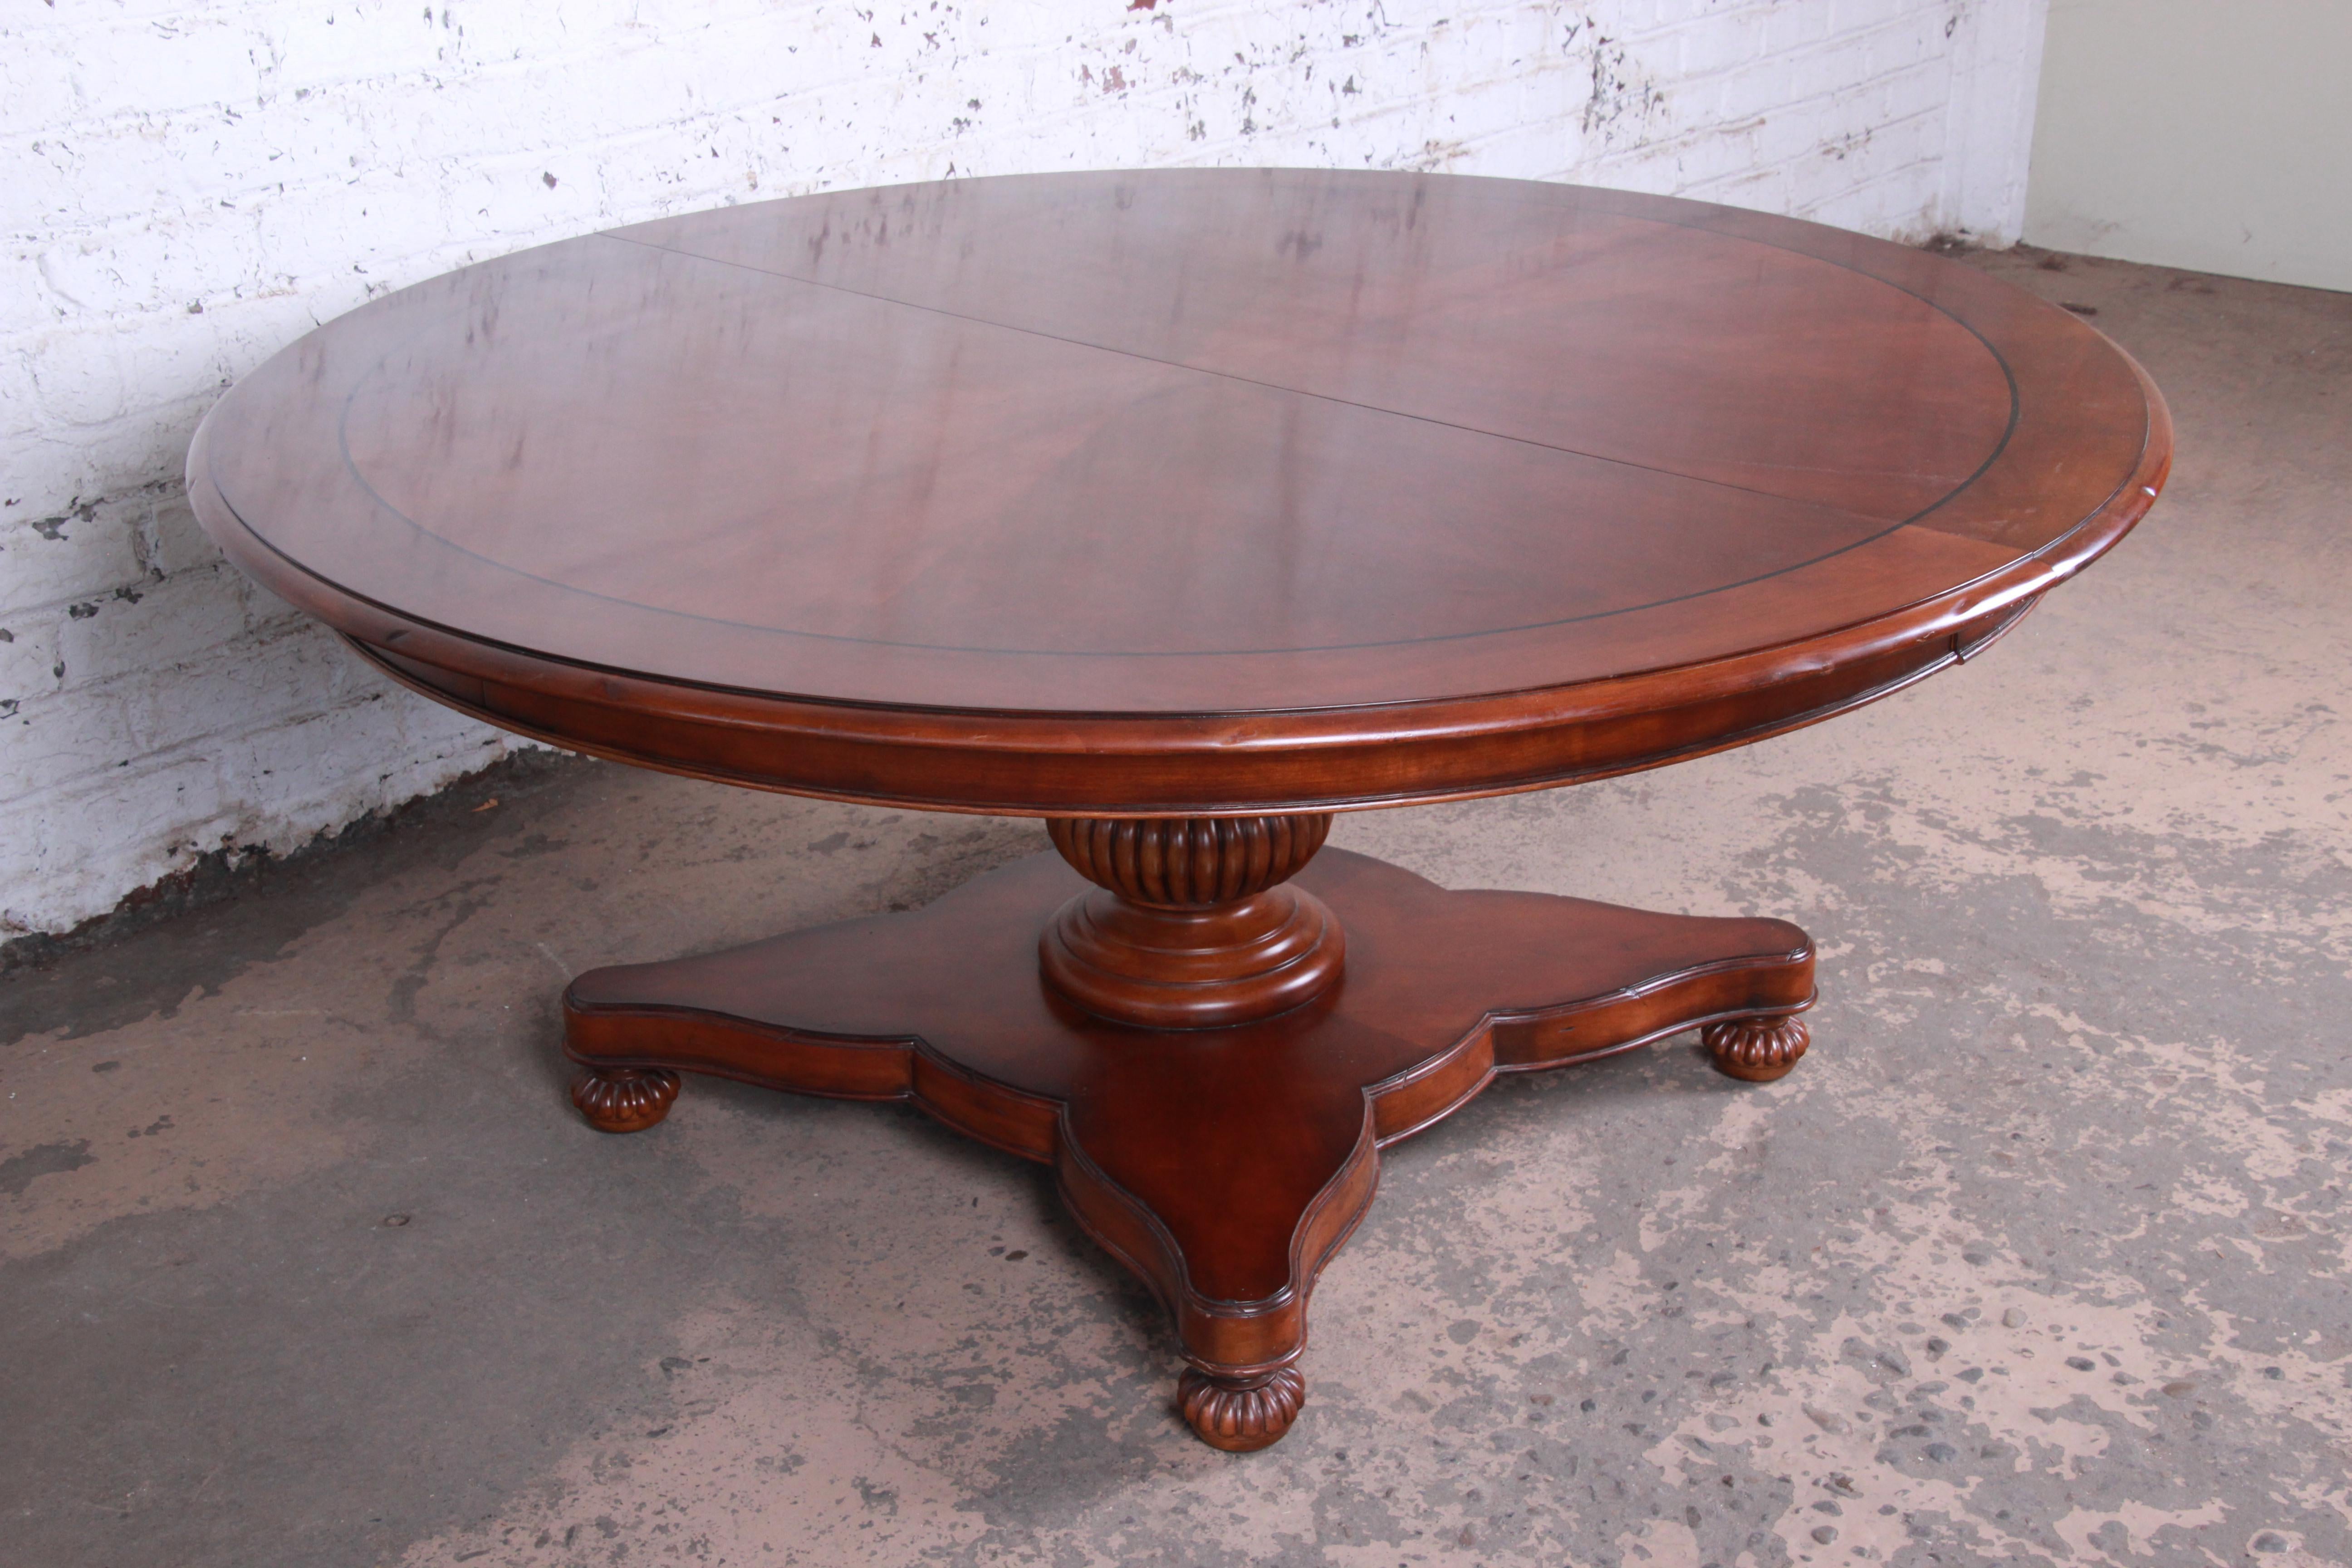 An exceptional neoclassical style banded mahogany dining or center table from the Milling Road Collection by Baker Furniture. The table features gorgeous mahogany wood grain and a nice traditional neoclassical style. It has a beautiful carved